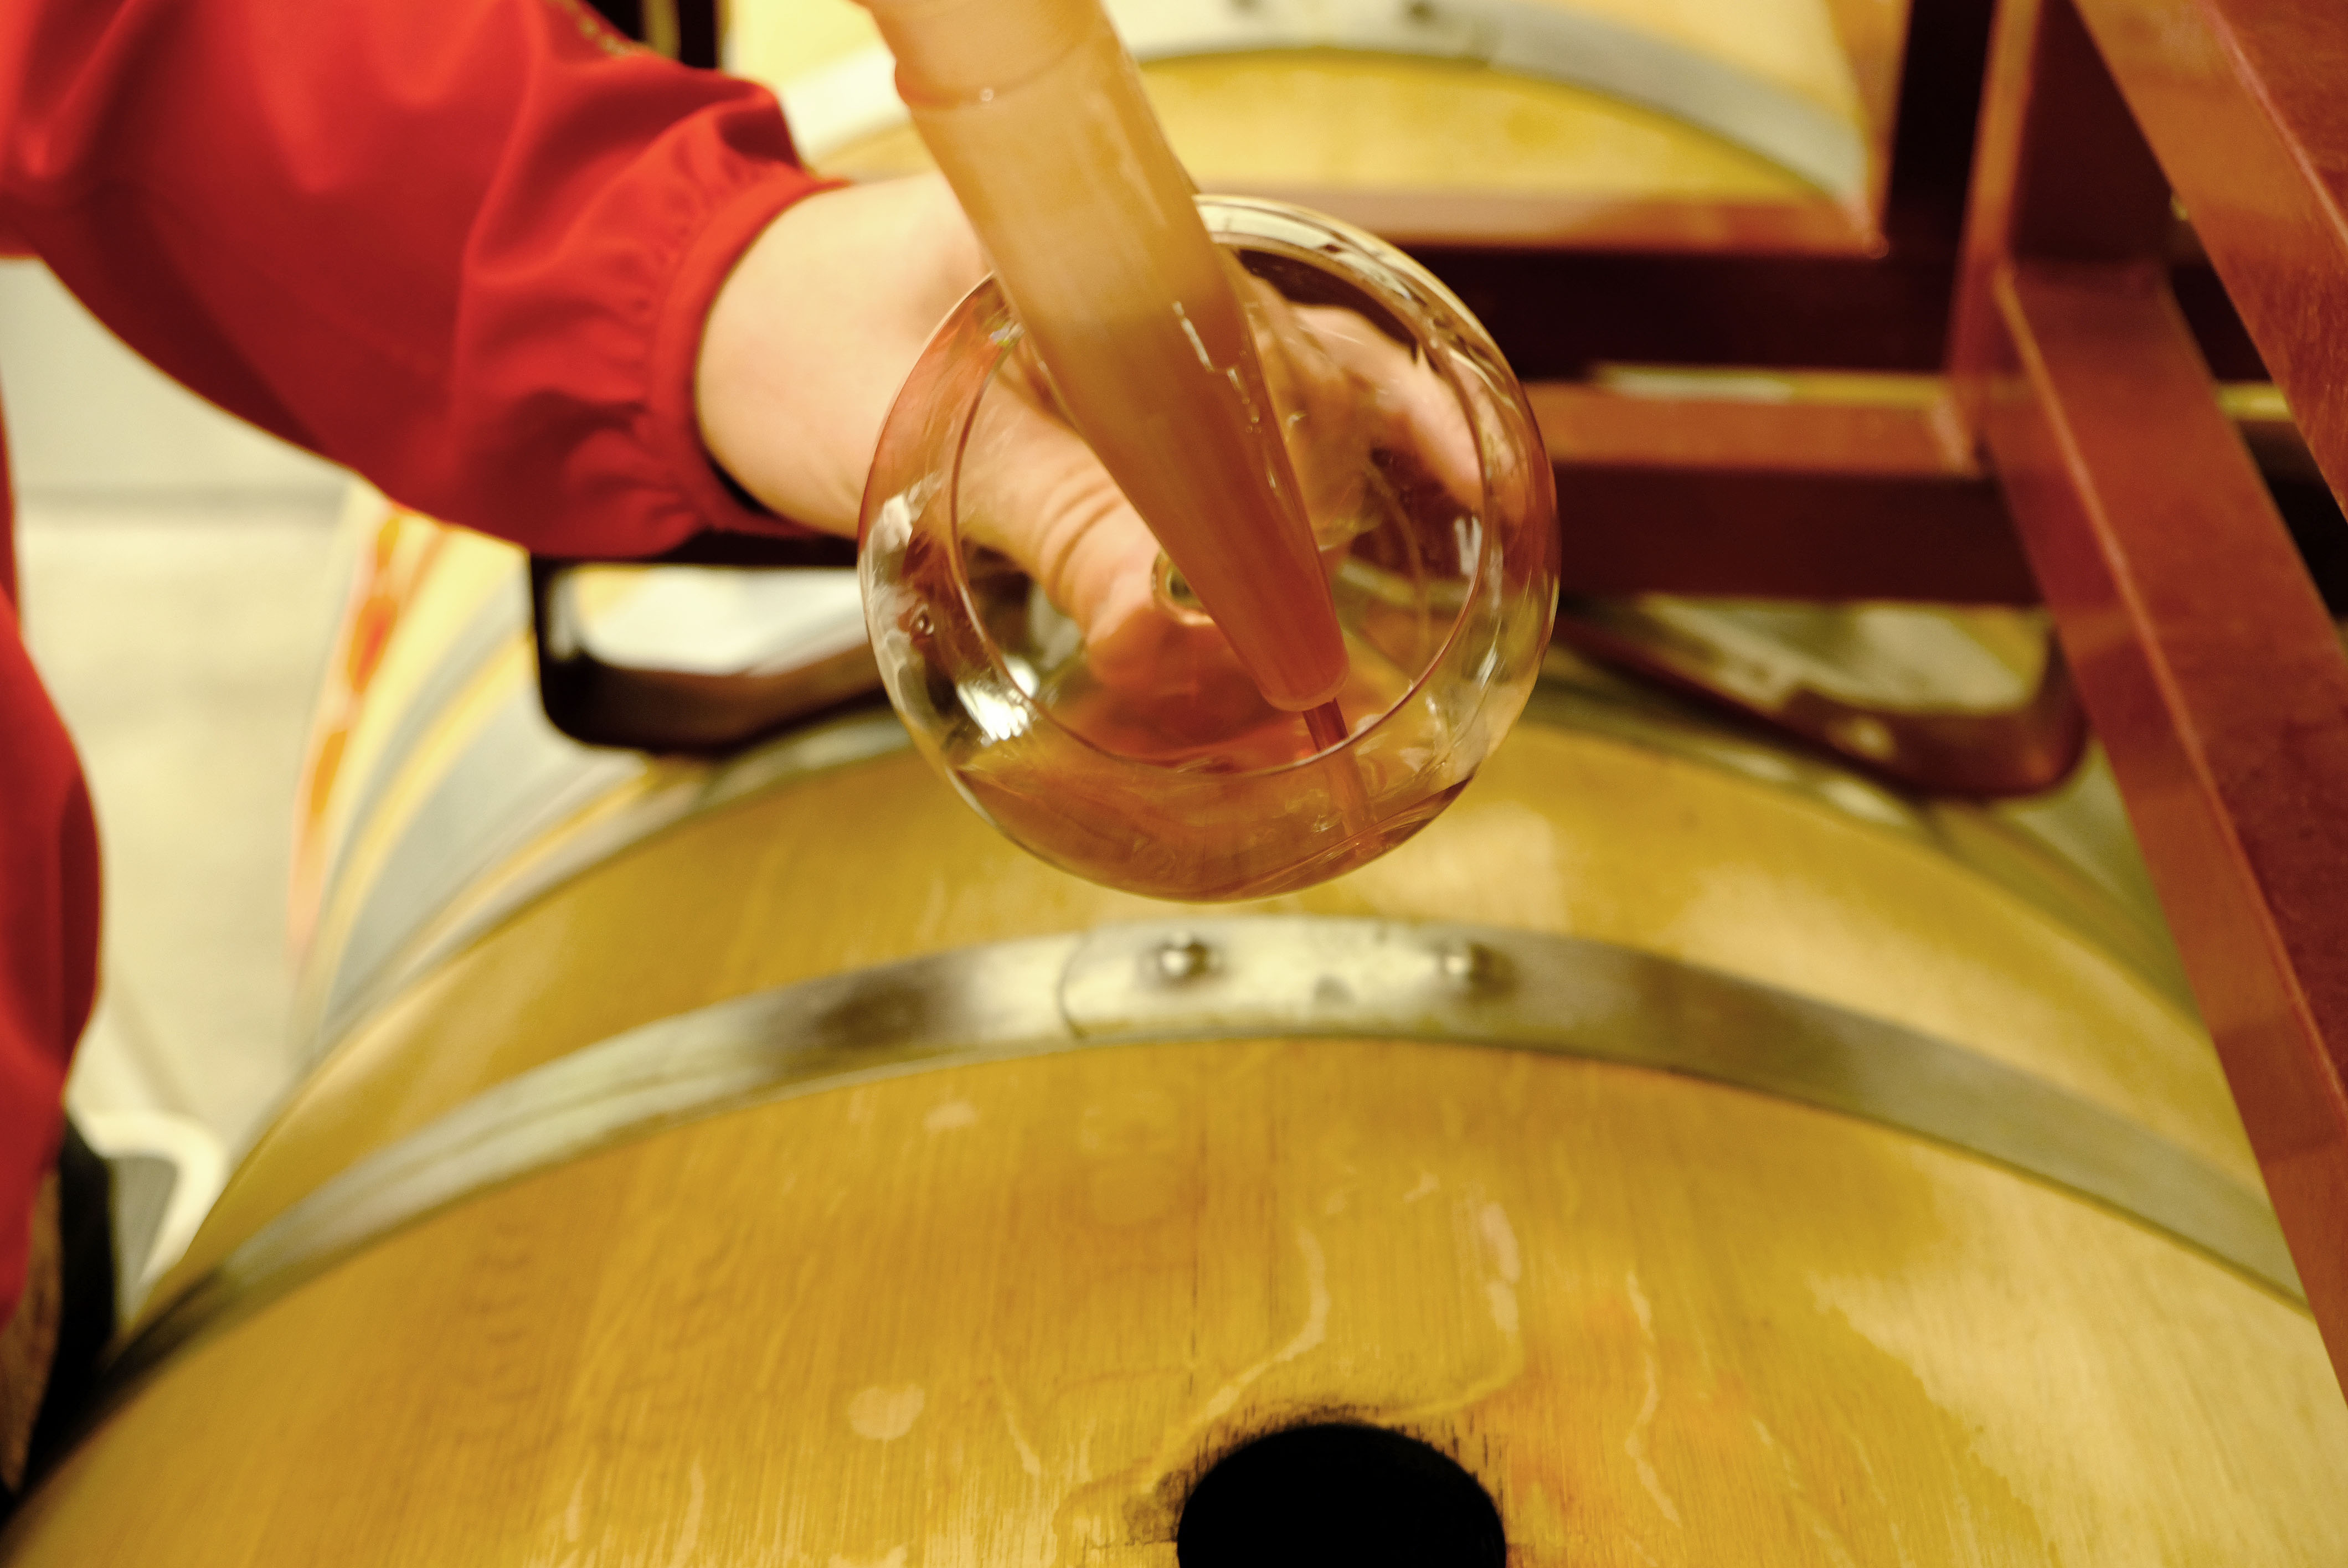 Tasting from the barrel